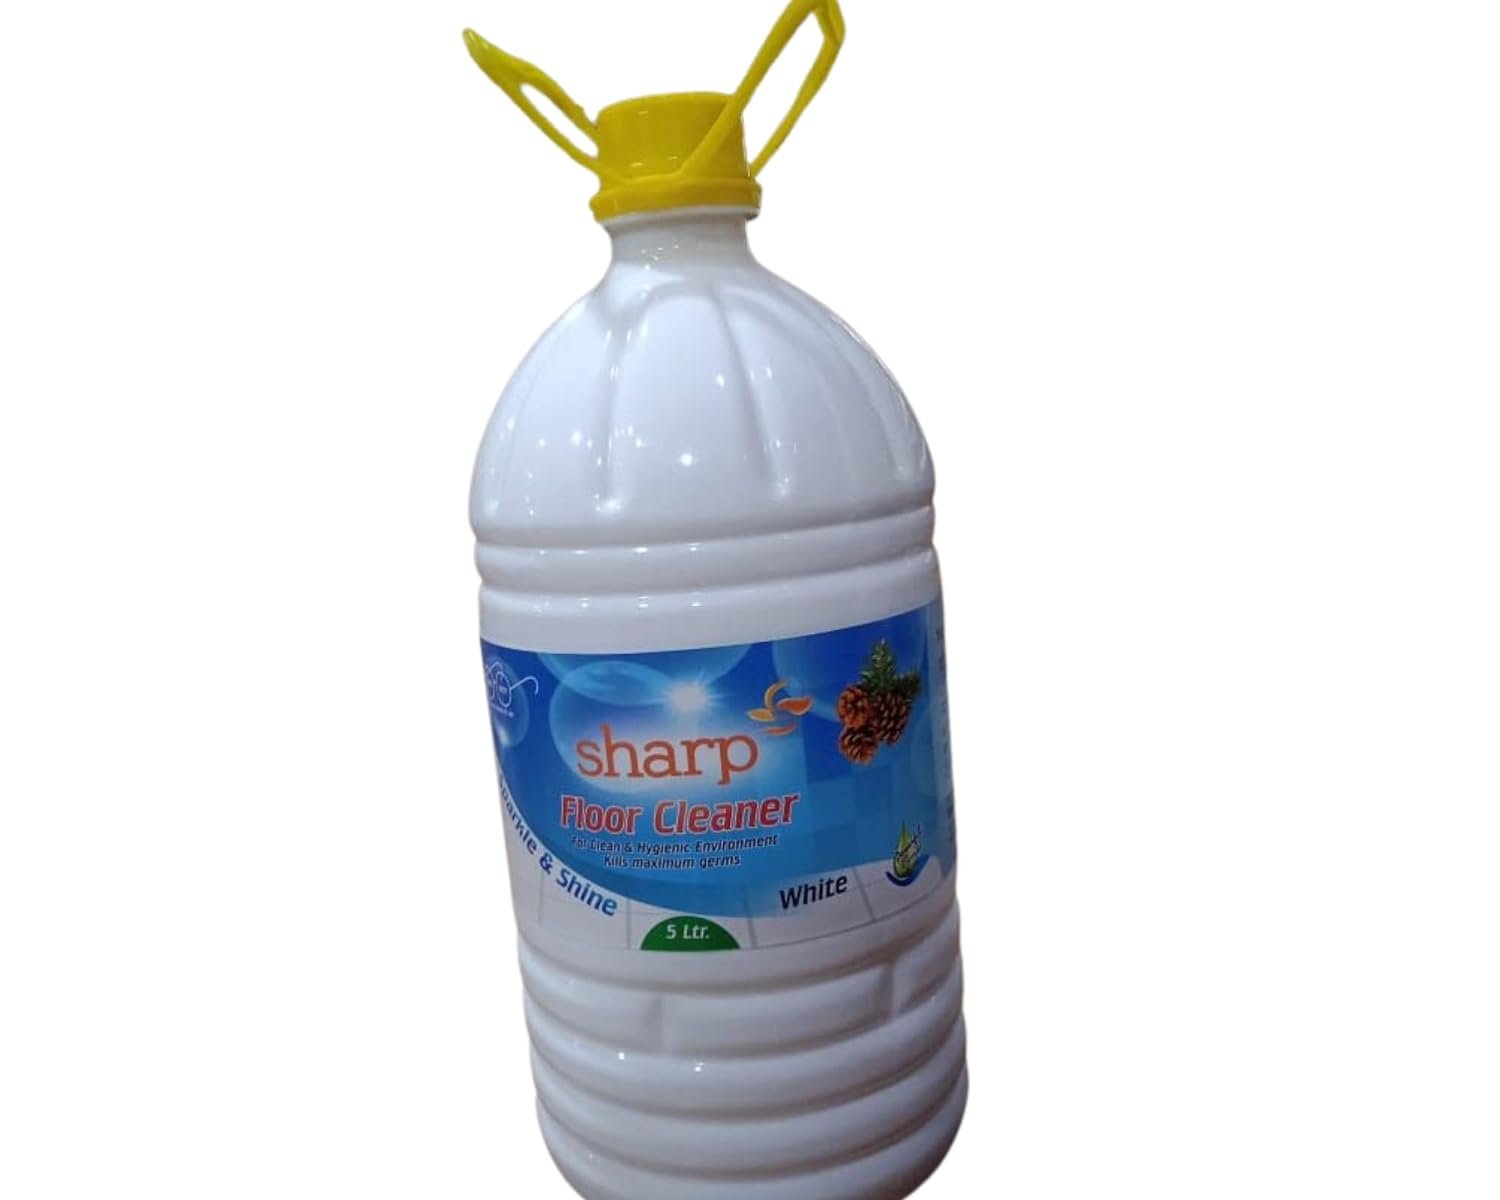 Sharp 5 Litre Can White Phenyle | Disinfectant Surface & Floor Cleaner Liquid | Suitable for All Floor Cleaner Mops | Kills 99.9% Germs